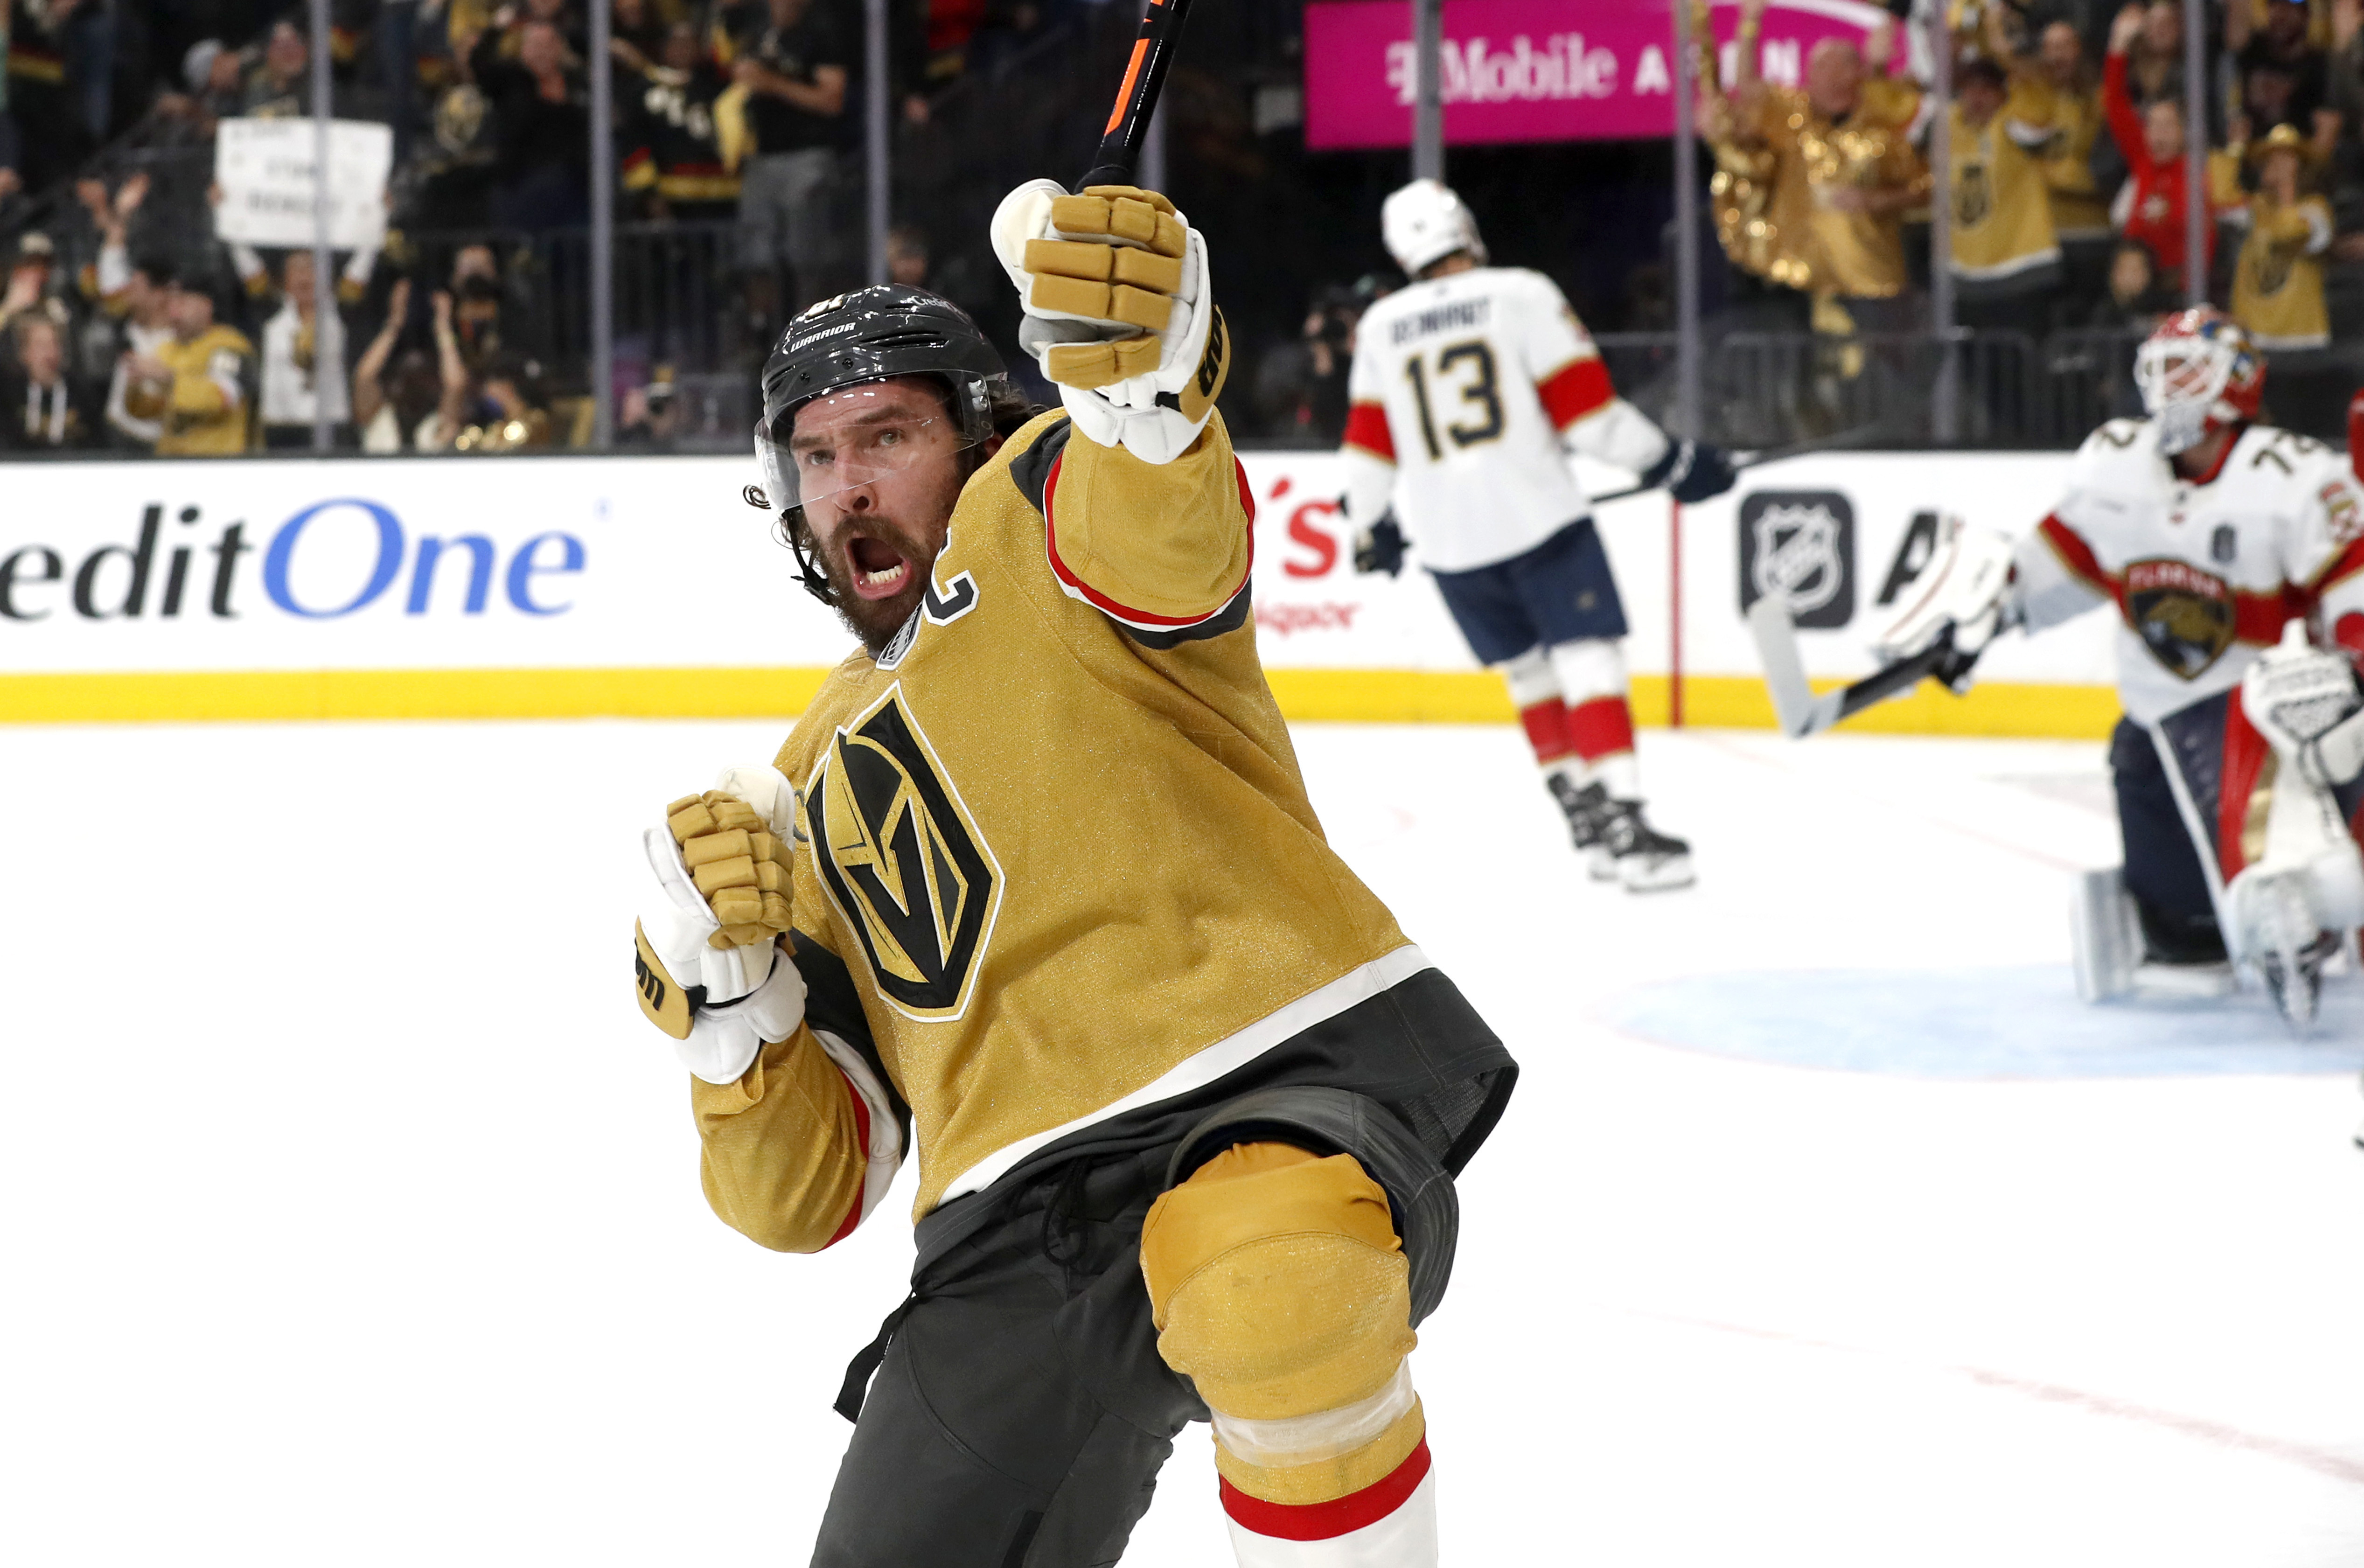 Las Vegas Golden Knights win 1st Stanley Cup in 9-3 win over Florida Panthers